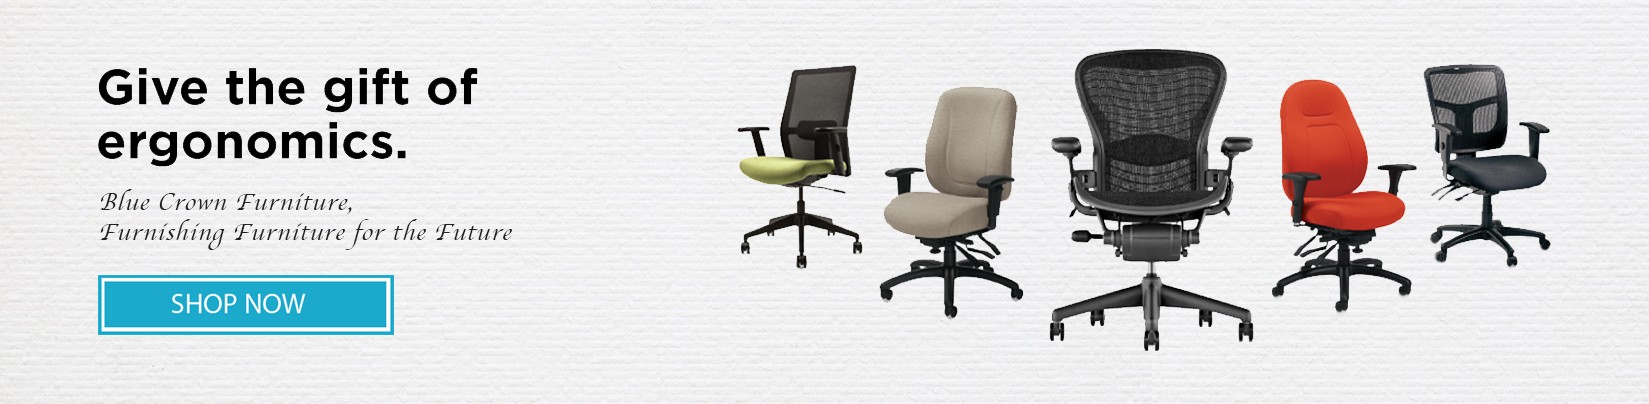 Blue crown furniture - Office chairs